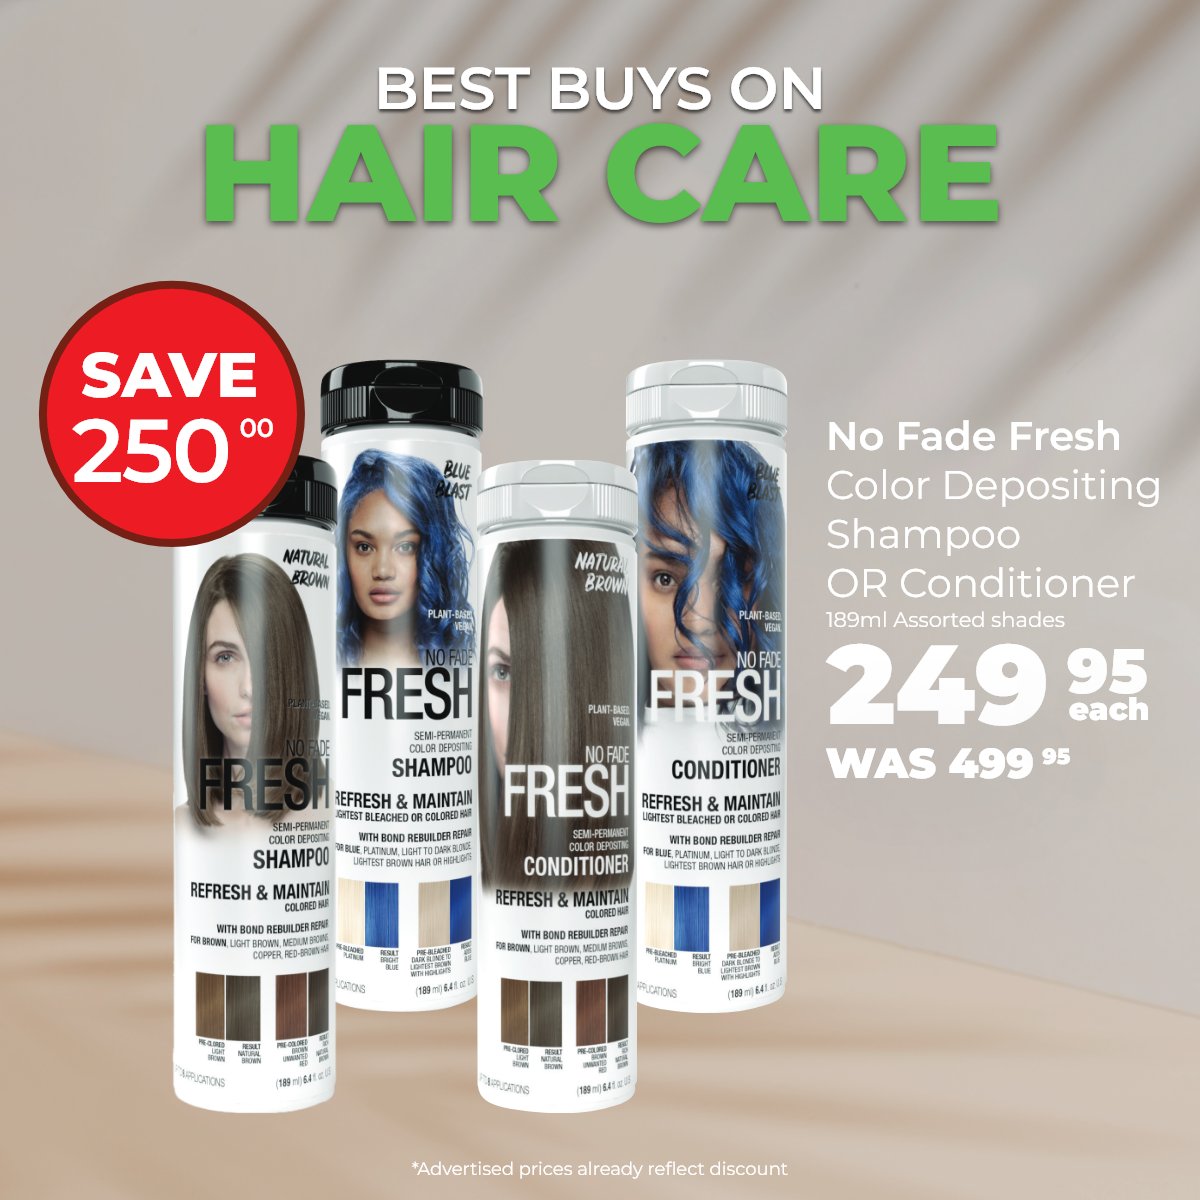 Keep your hair colour fresh and fabulous with colour depositing shampoo & conditioner. Get yours now: bit.ly/3W41q03 Offer valid until 12 May 2024. #HairCare #NoFadeFresh #HairColour #DisChem